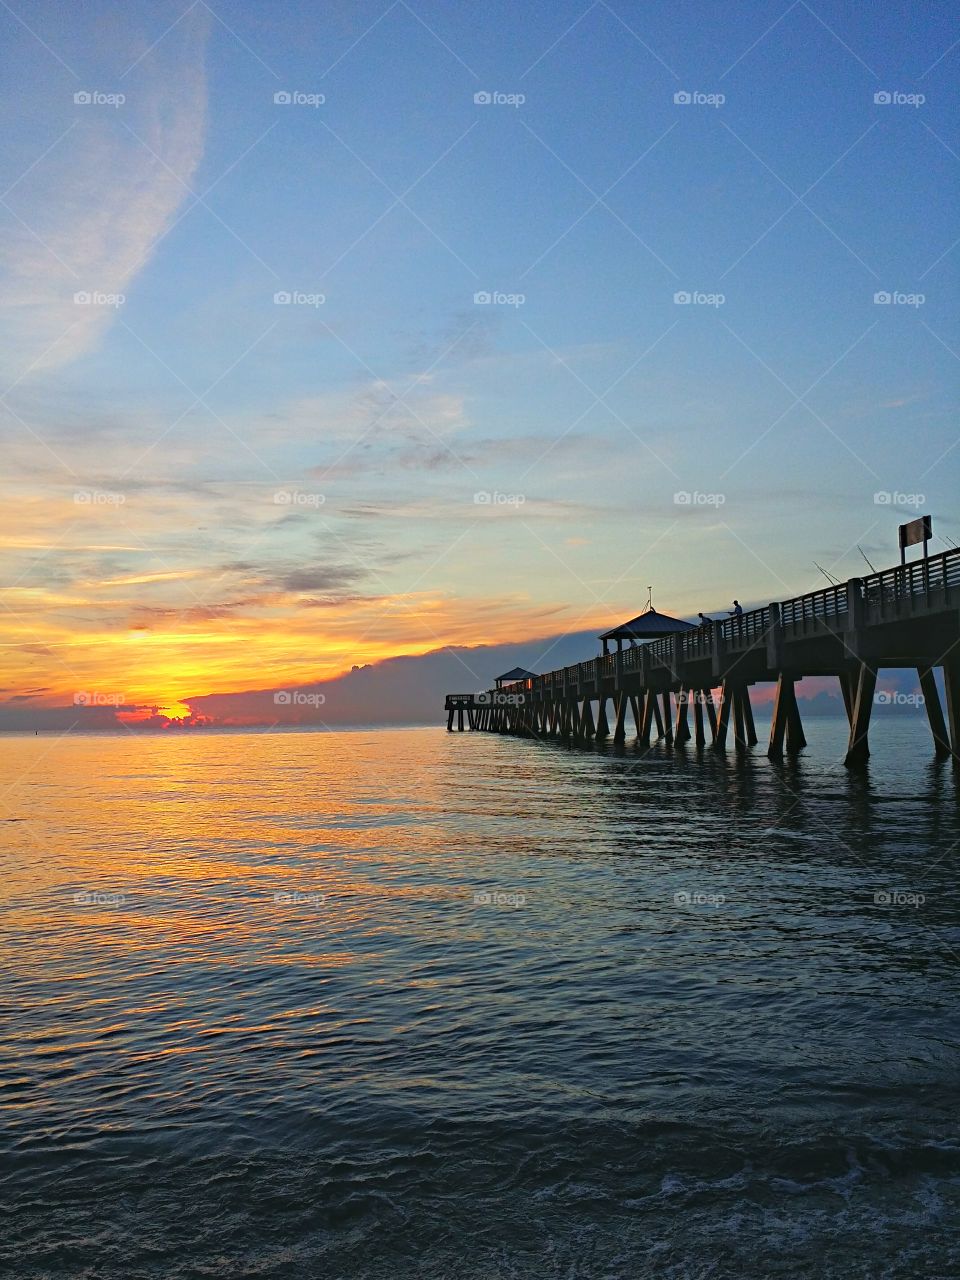 Sunrise at the Pier. Beautiful sunrise promises a great day!